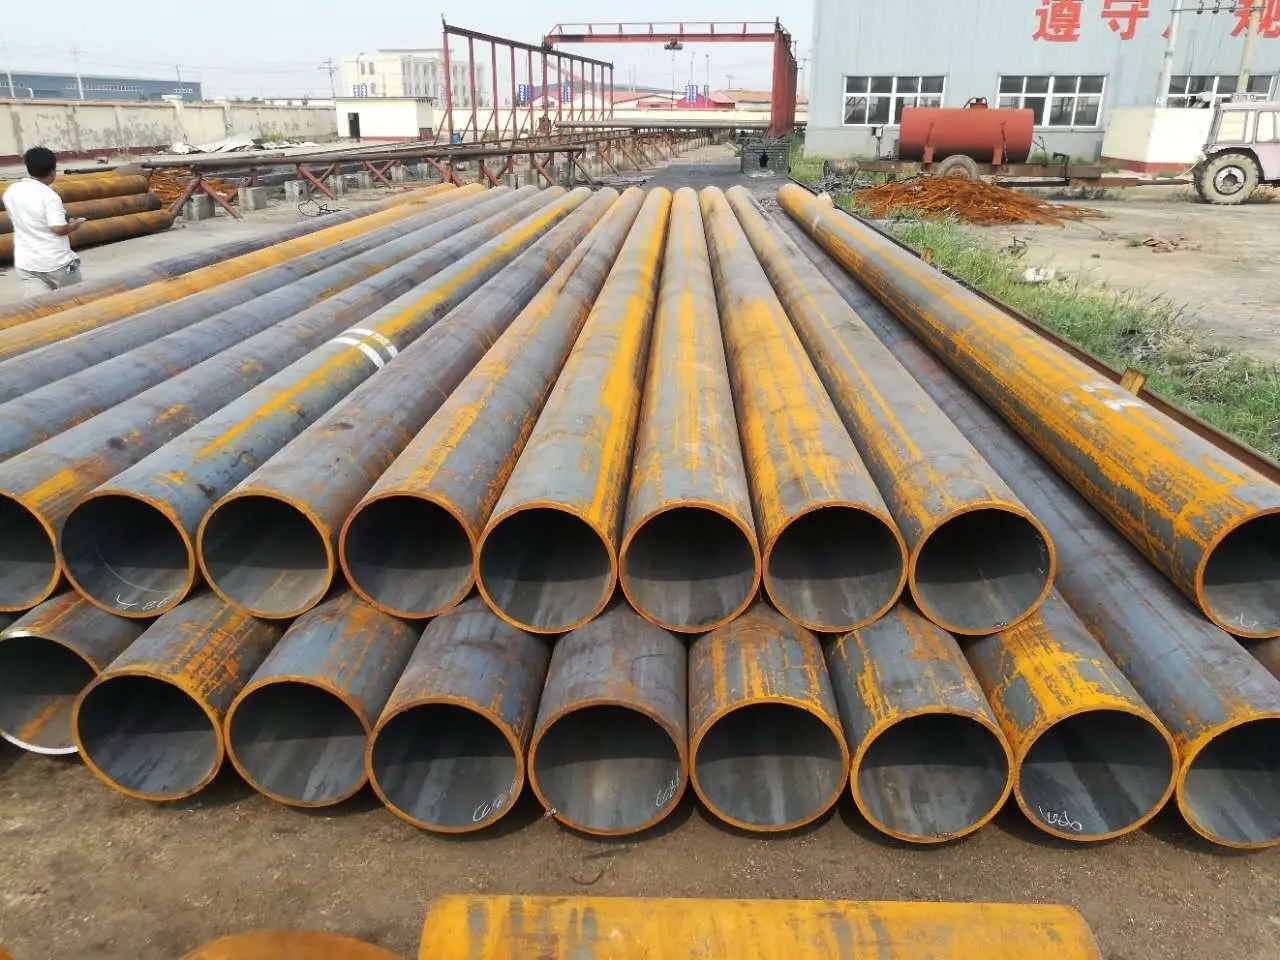 Classification of pipes